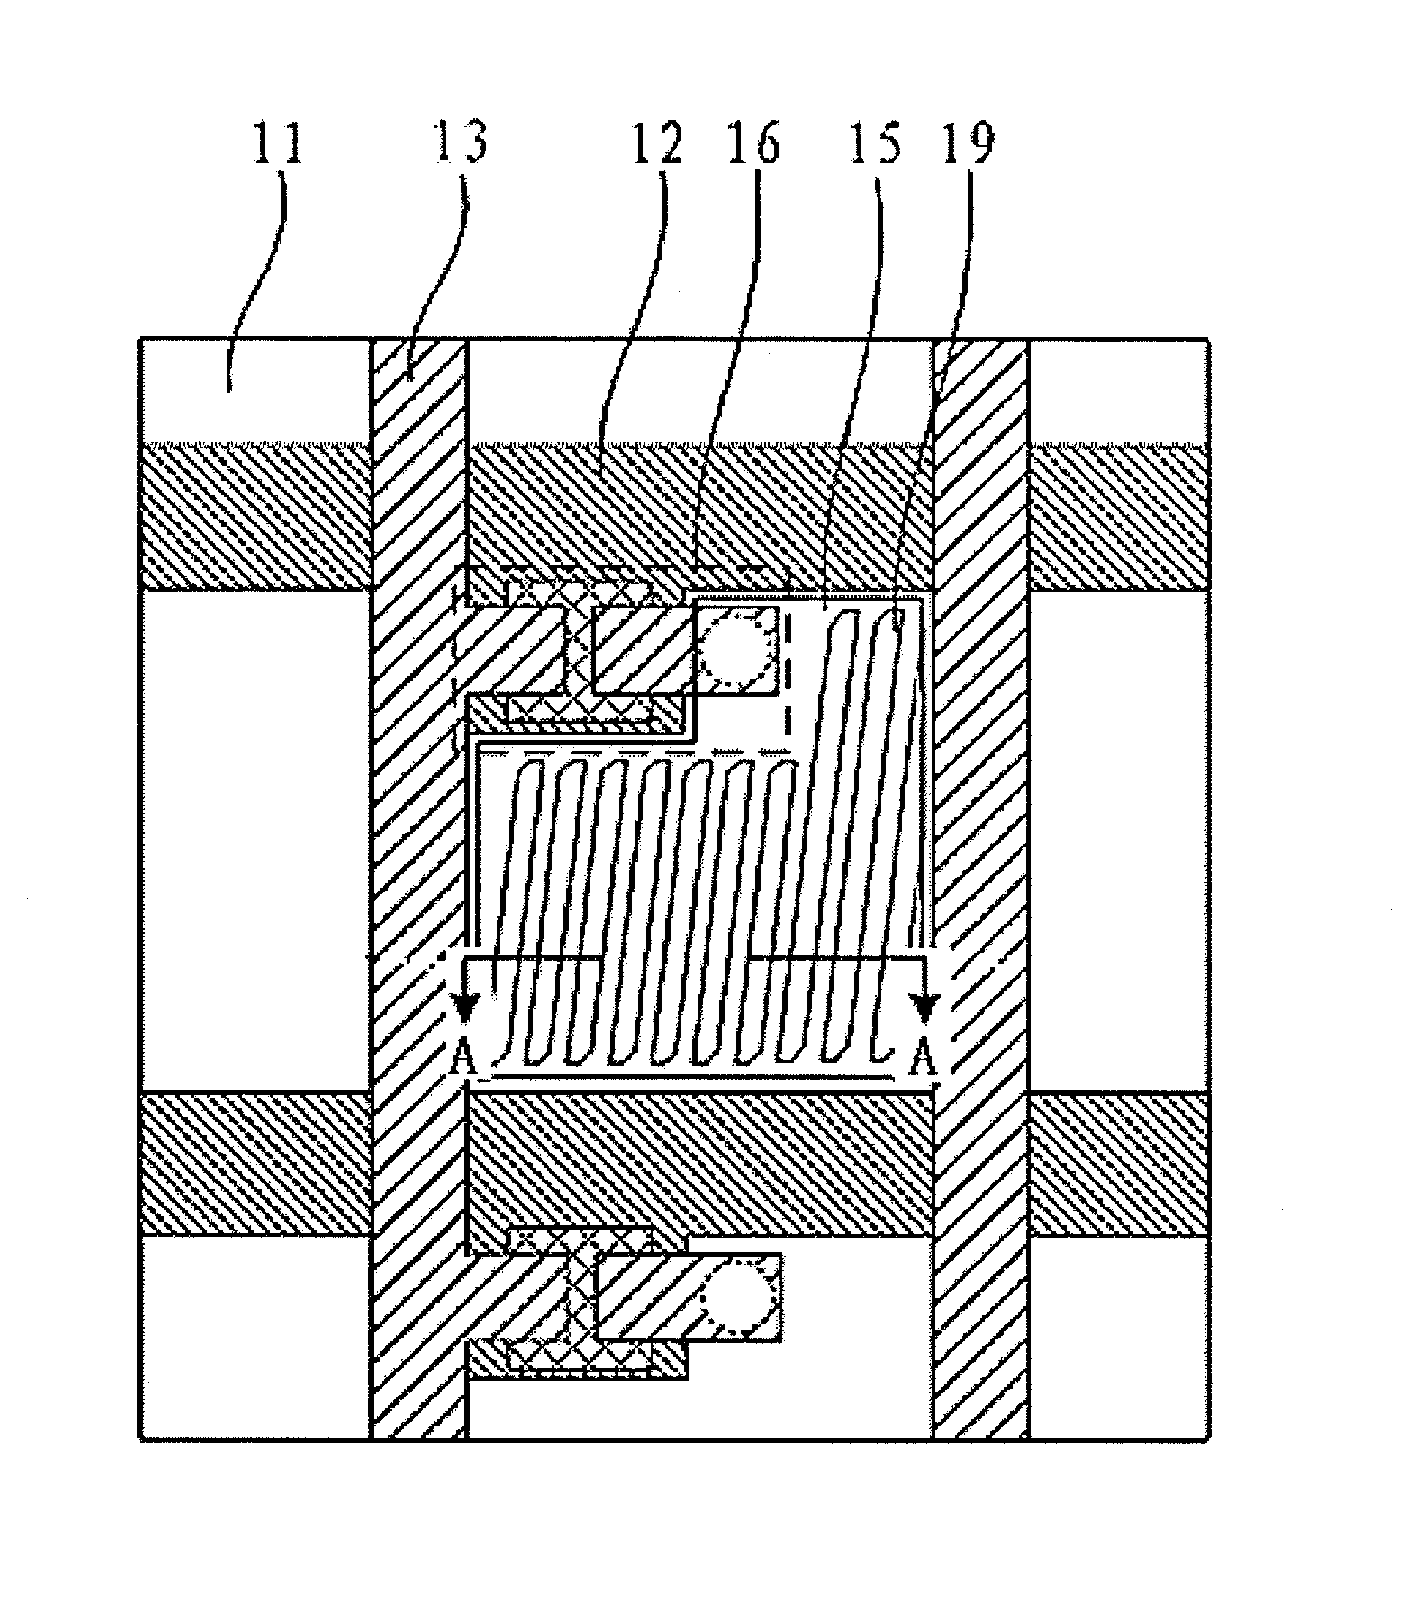 Array substrate and liquid crystal display panel